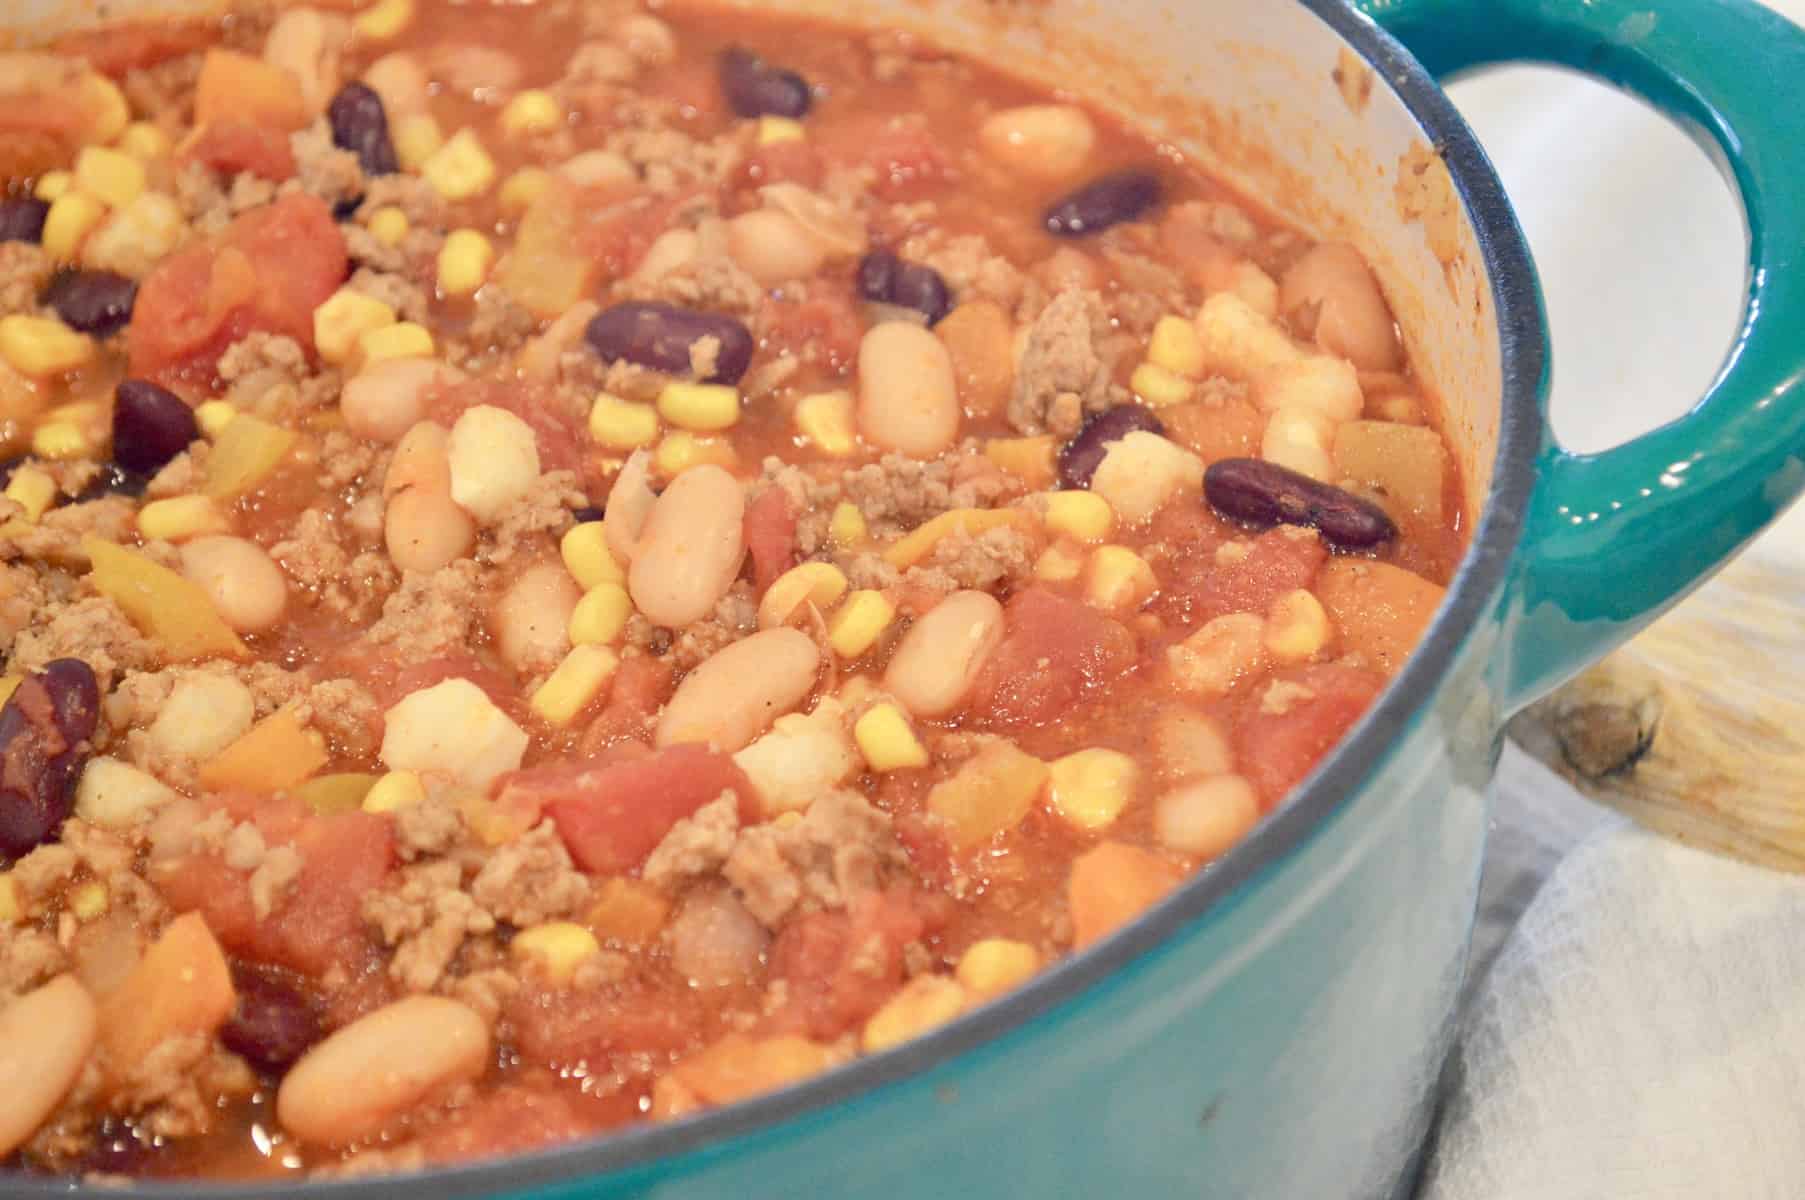 Healthy Turkey Chili with Hominy and Beans in a Teal Pot